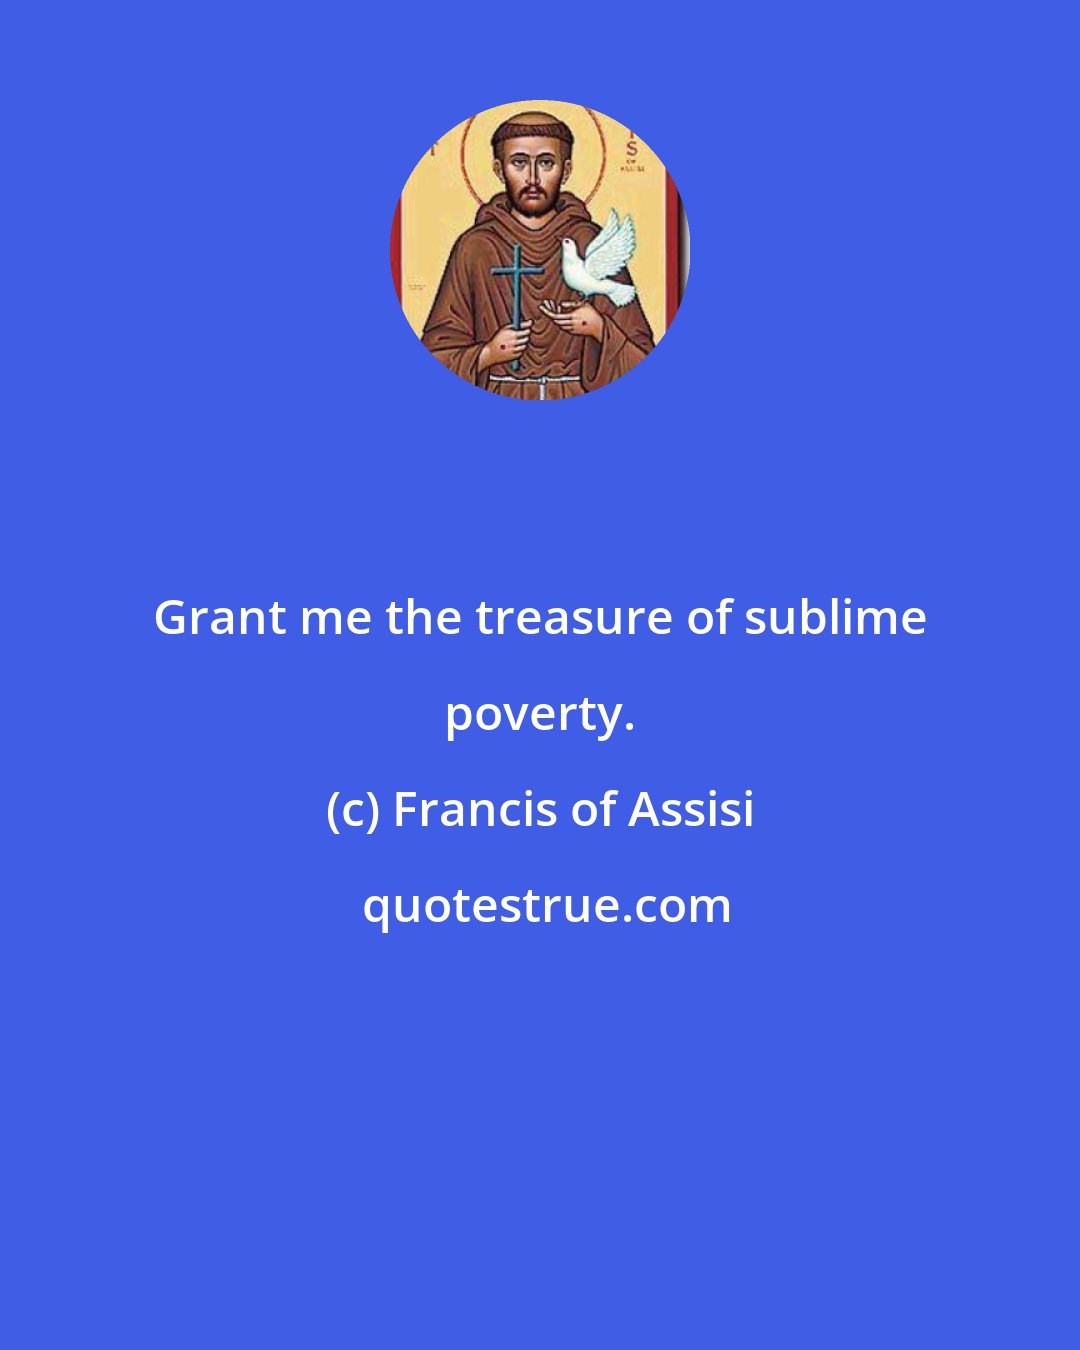 Francis of Assisi: Grant me the treasure of sublime poverty.